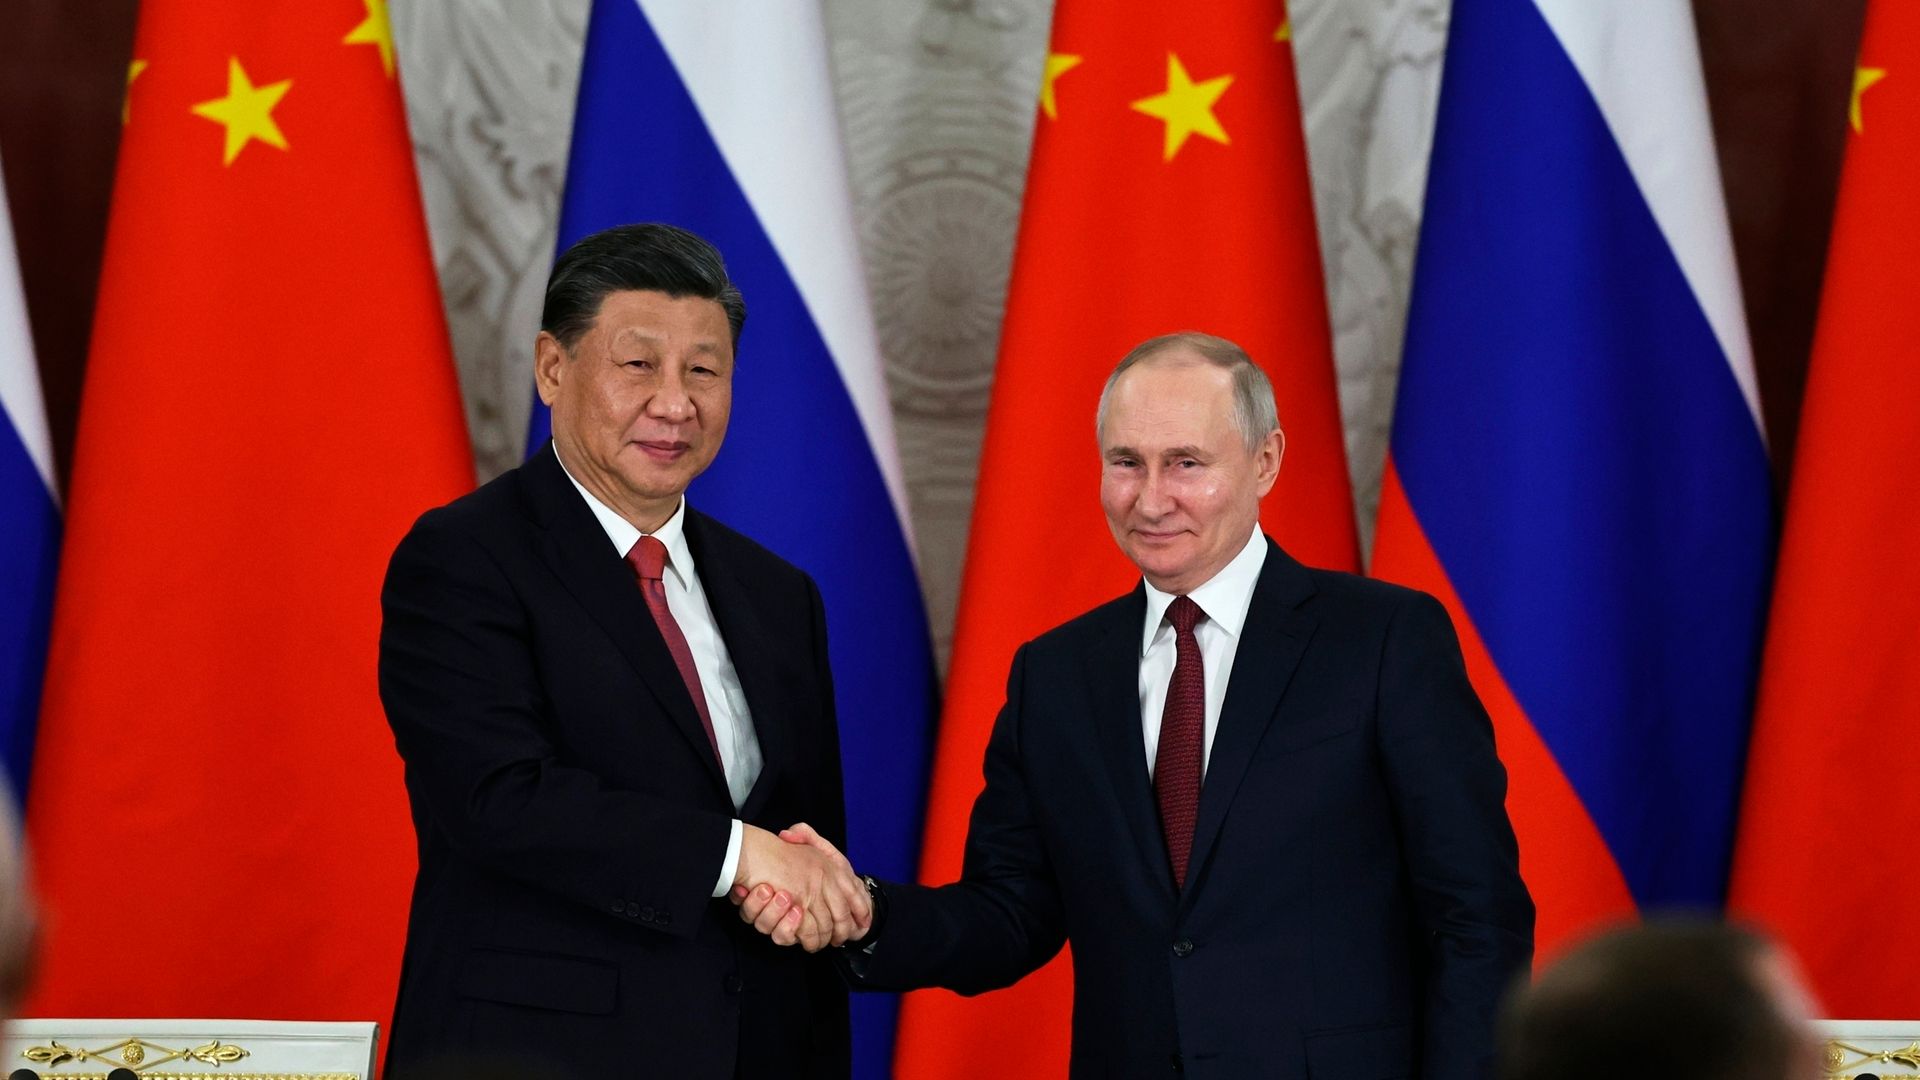 As Putin visits Xi, one is clearly stronger than the other